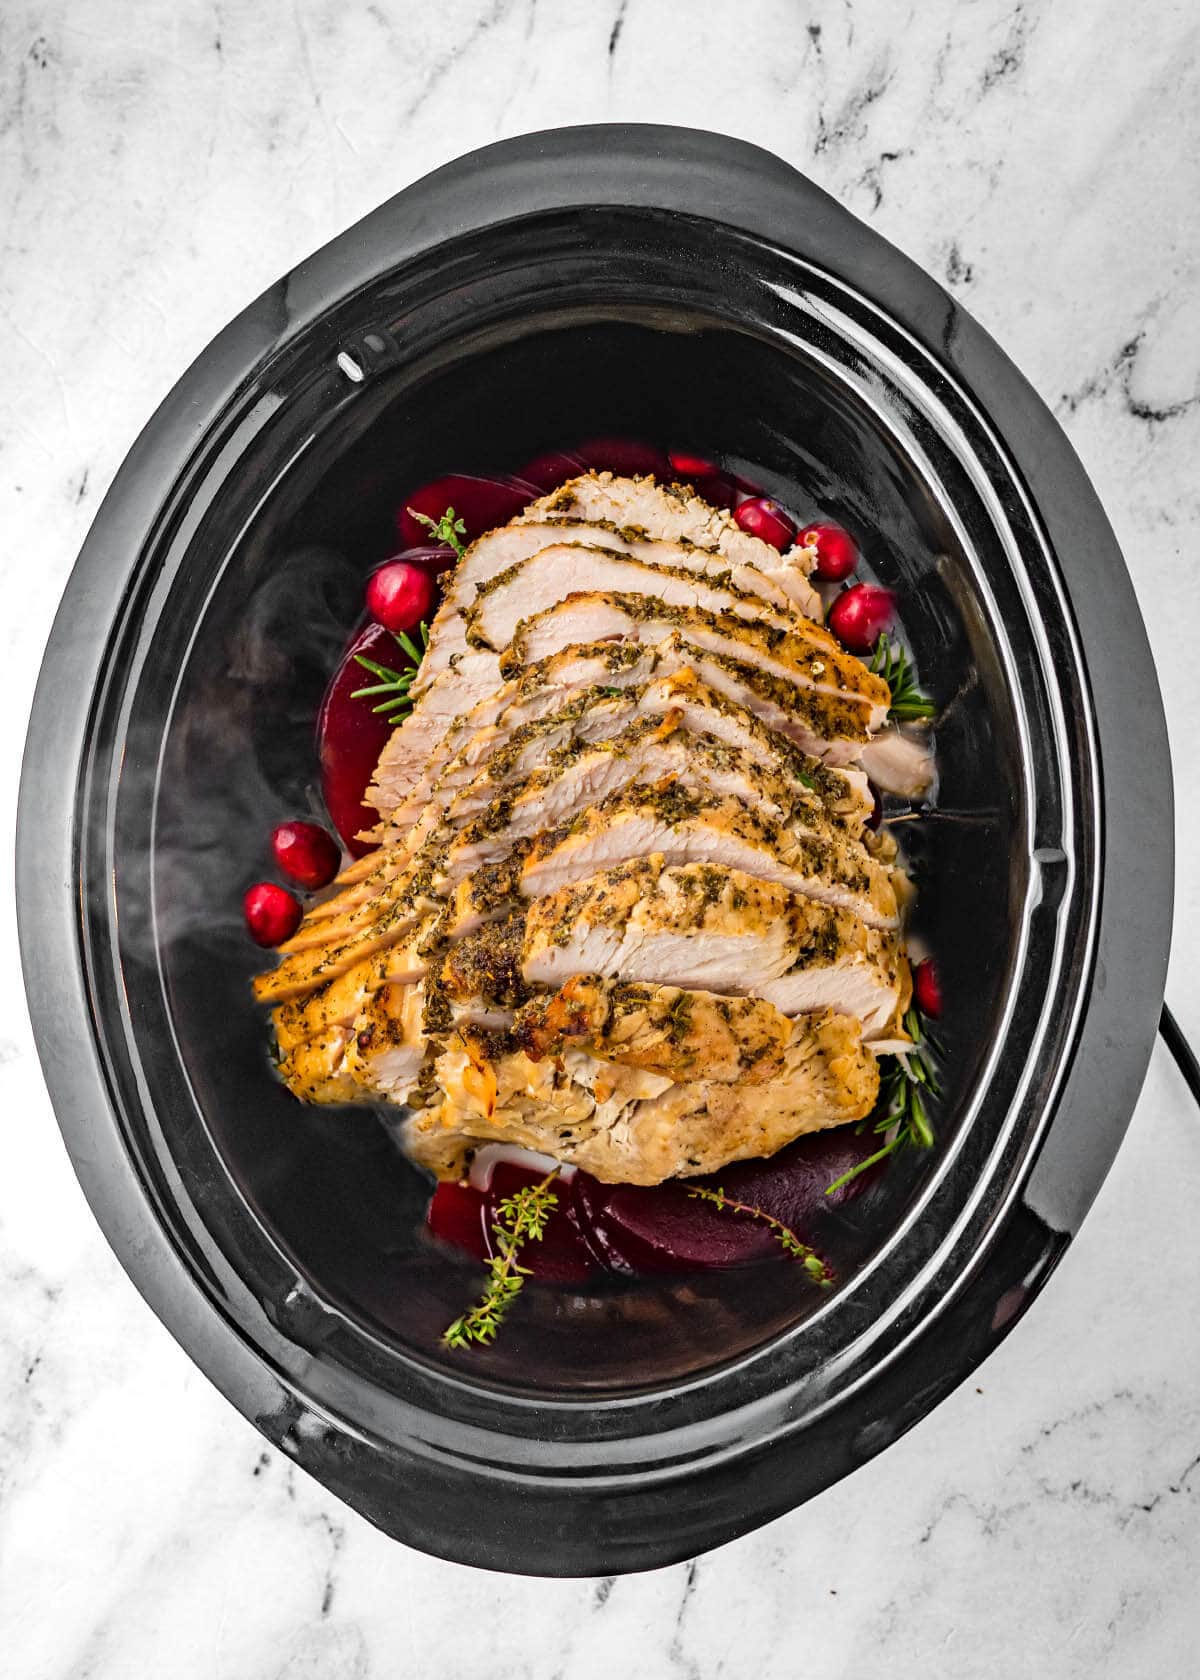 Slow Cooker Turkey Breast in a black crock with cranberries